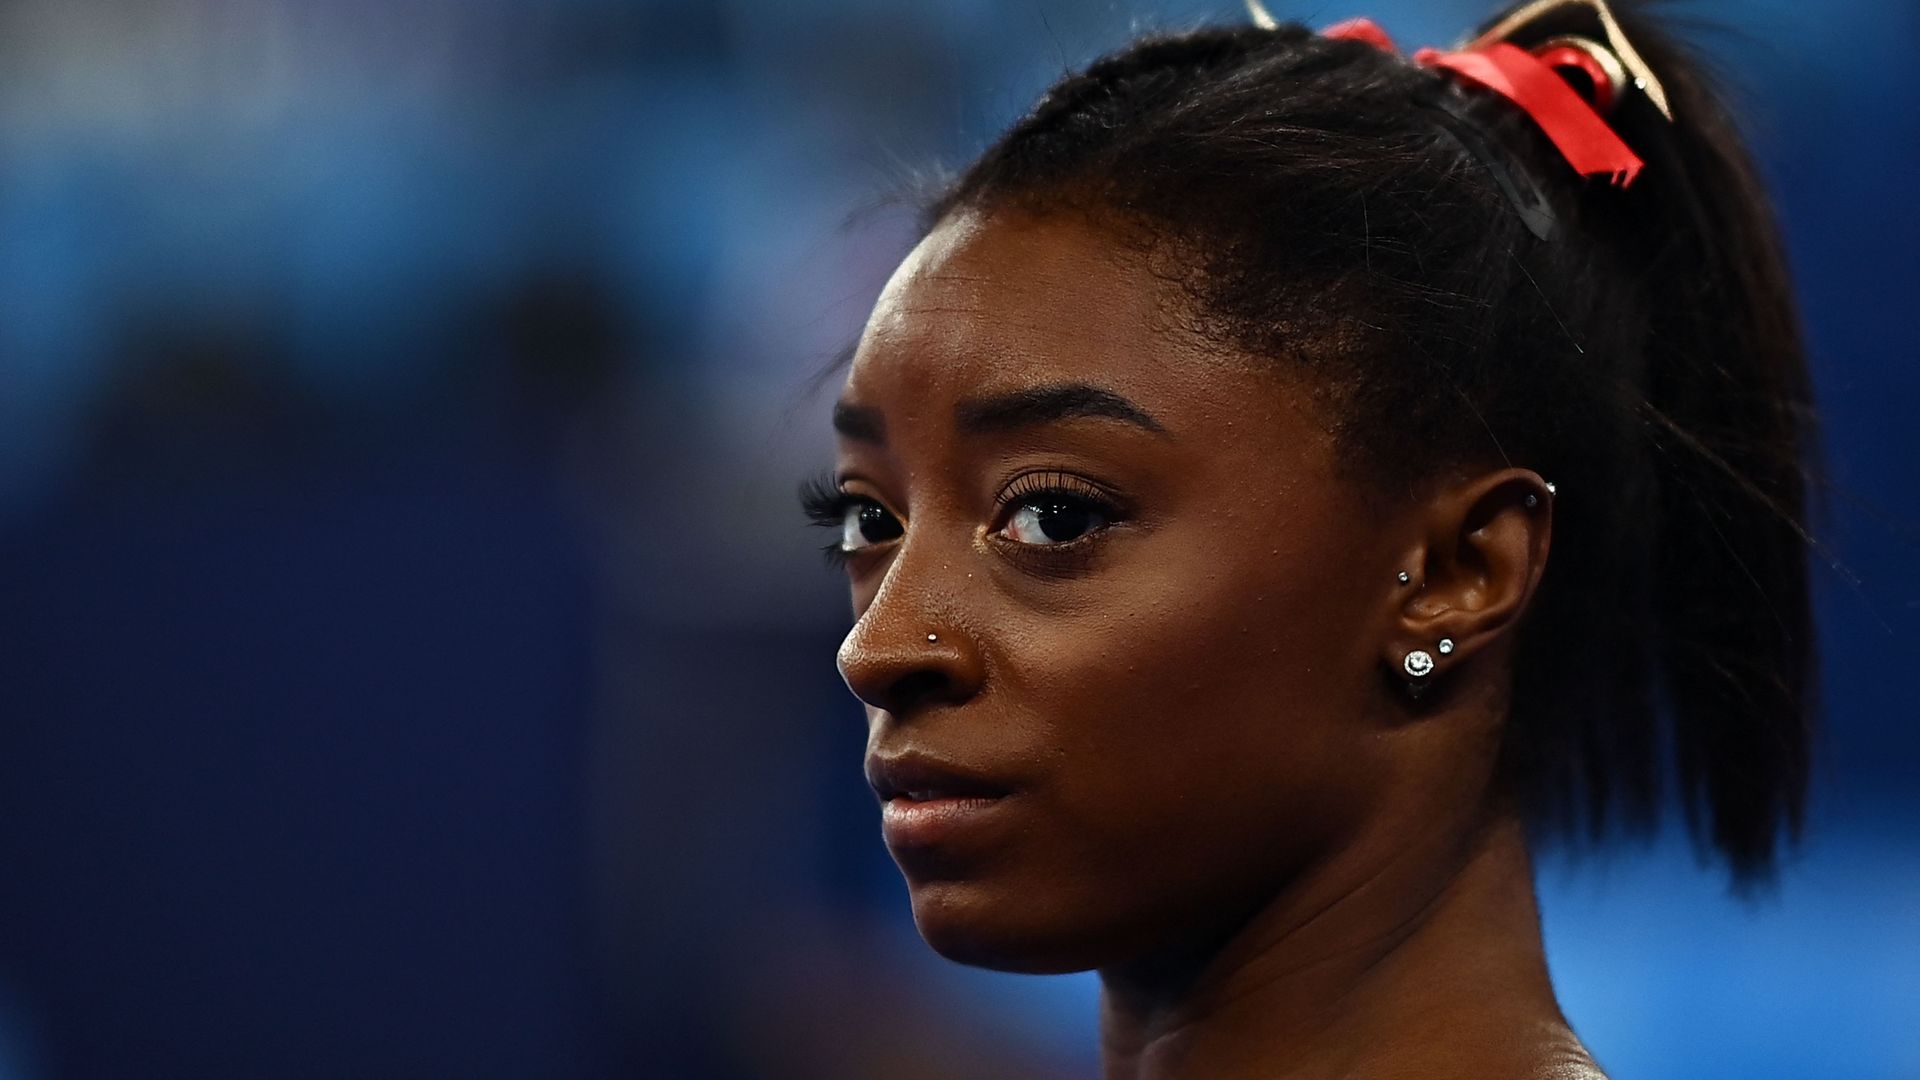 Simone Biles gets ready to compete in the uneven bars event of the artistic gymnastics women's qualification during the Tokyo 2020 Olympic Games at the Ariake Gymnastics Centre in Tokyo on July 25